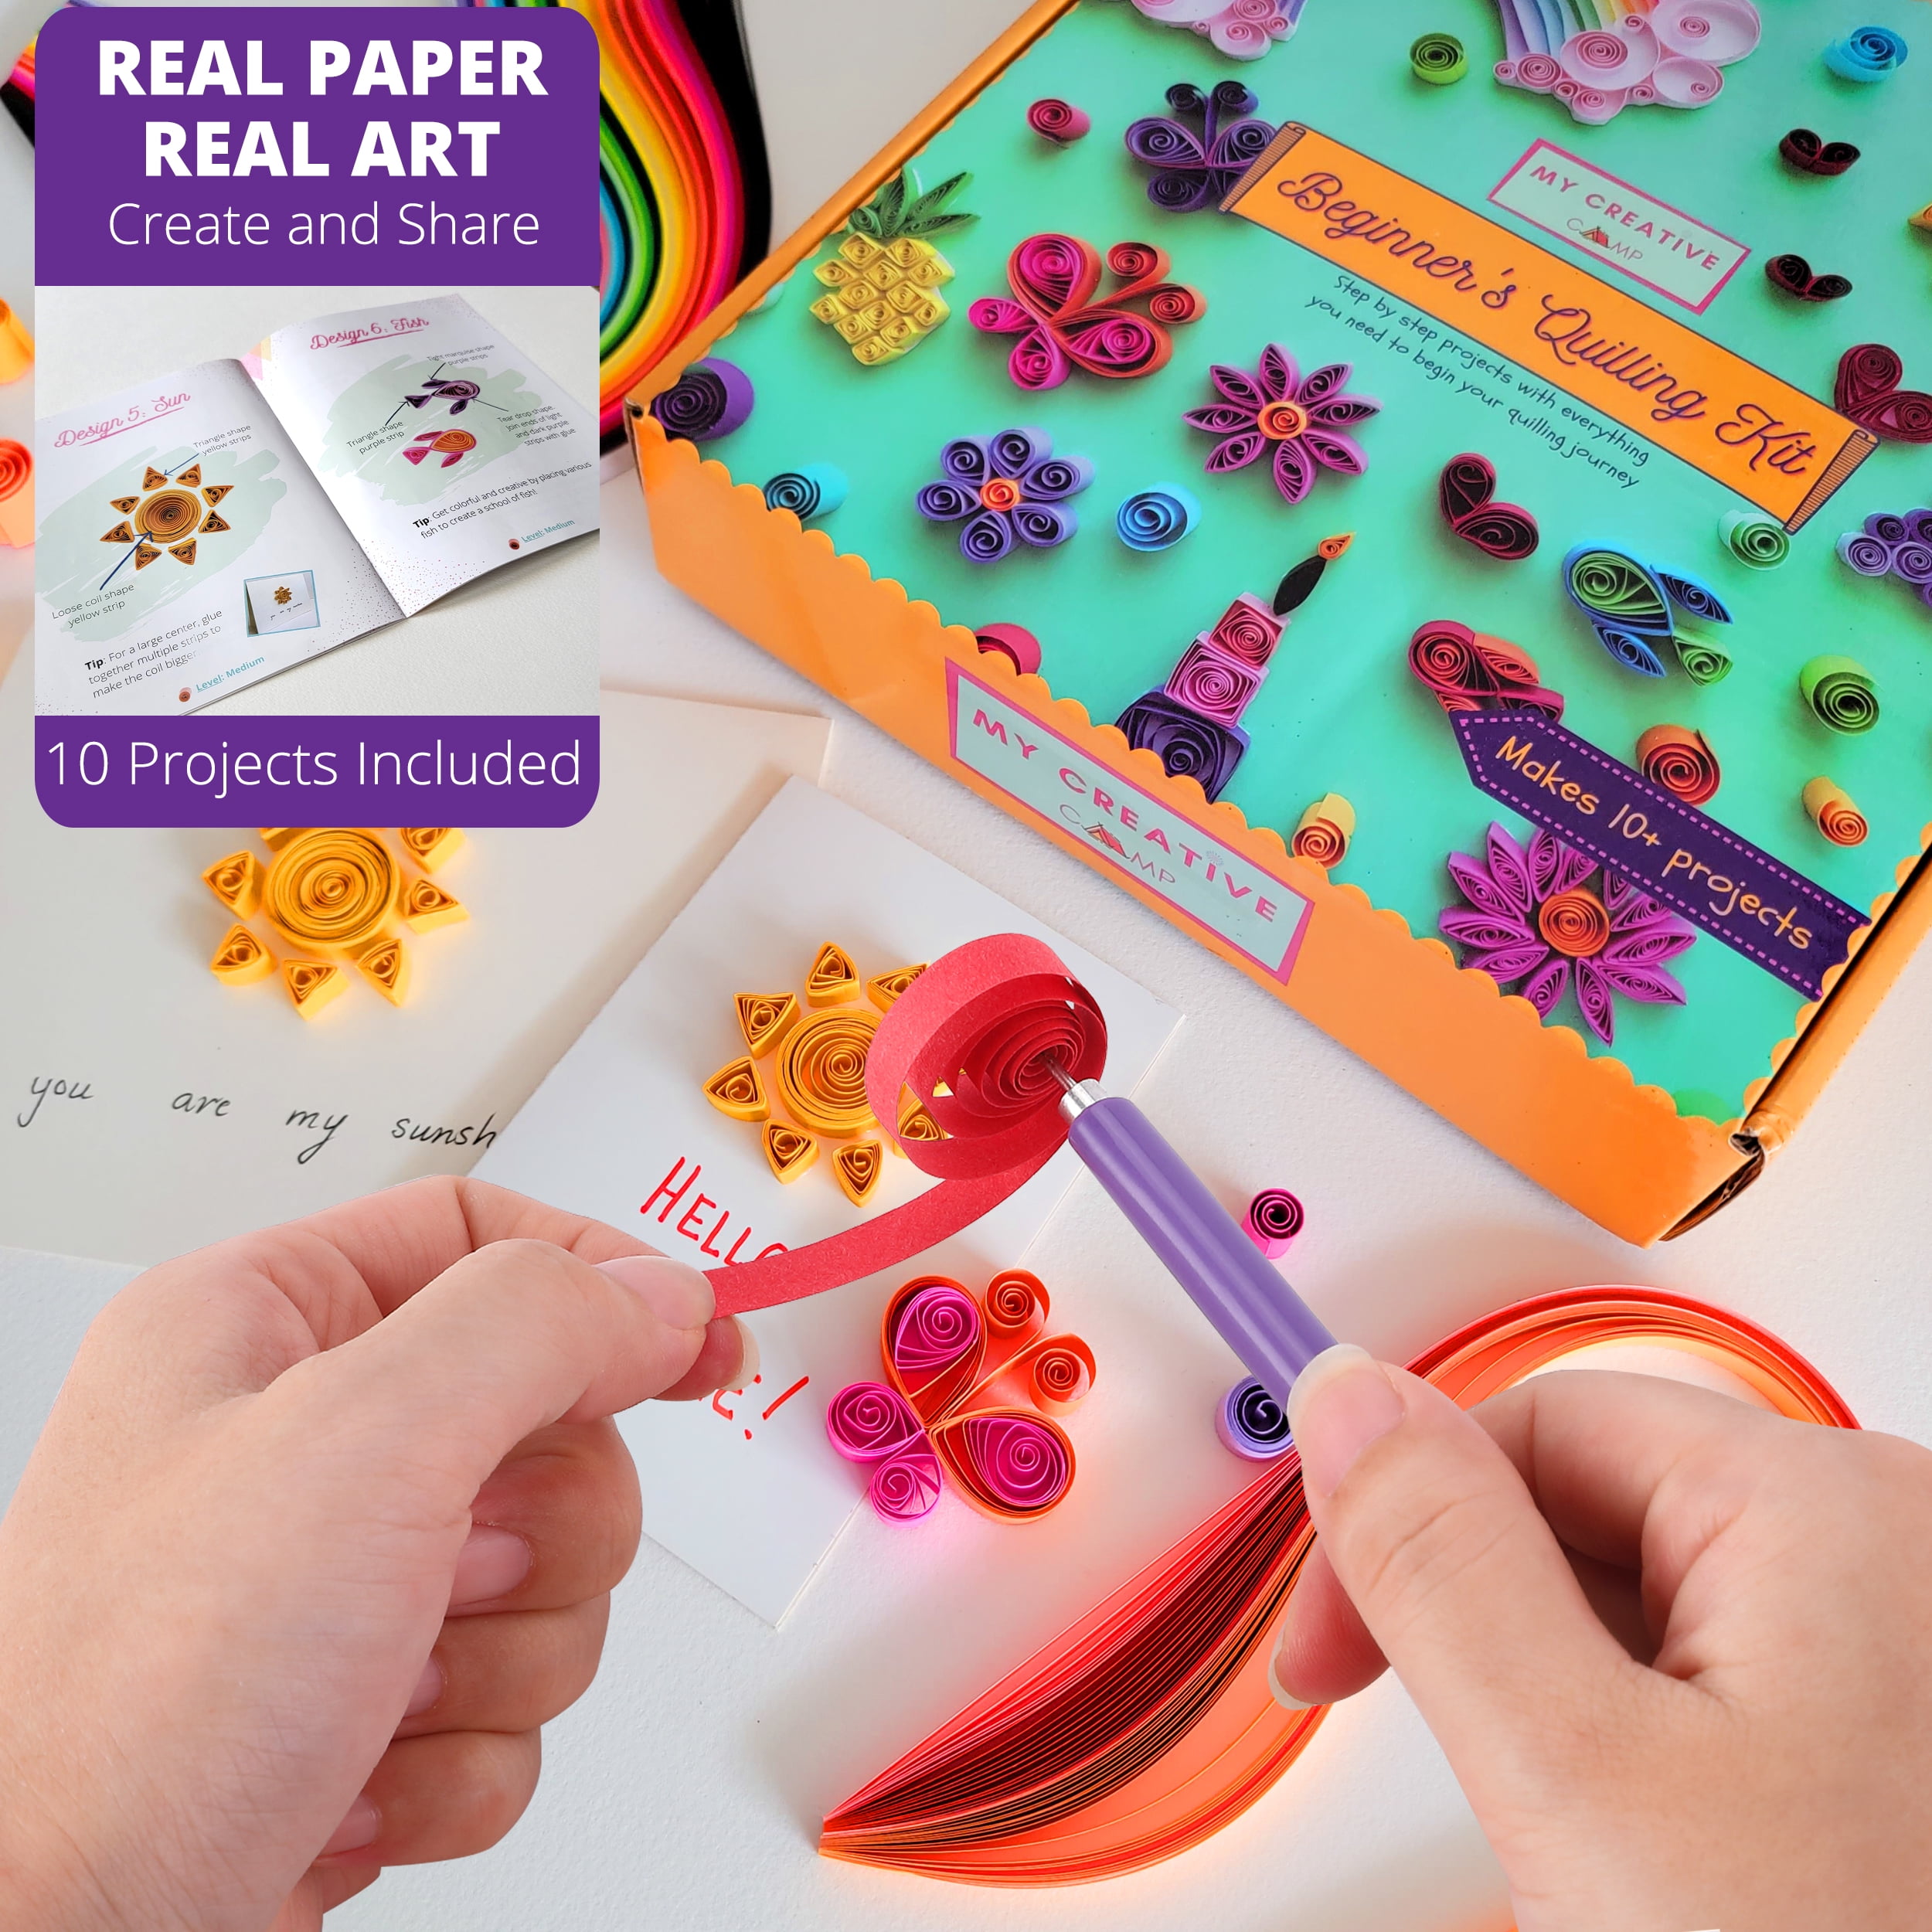 5 Piece Quilling Kit With 200 Papers at Rs 189.00, Craft Kit